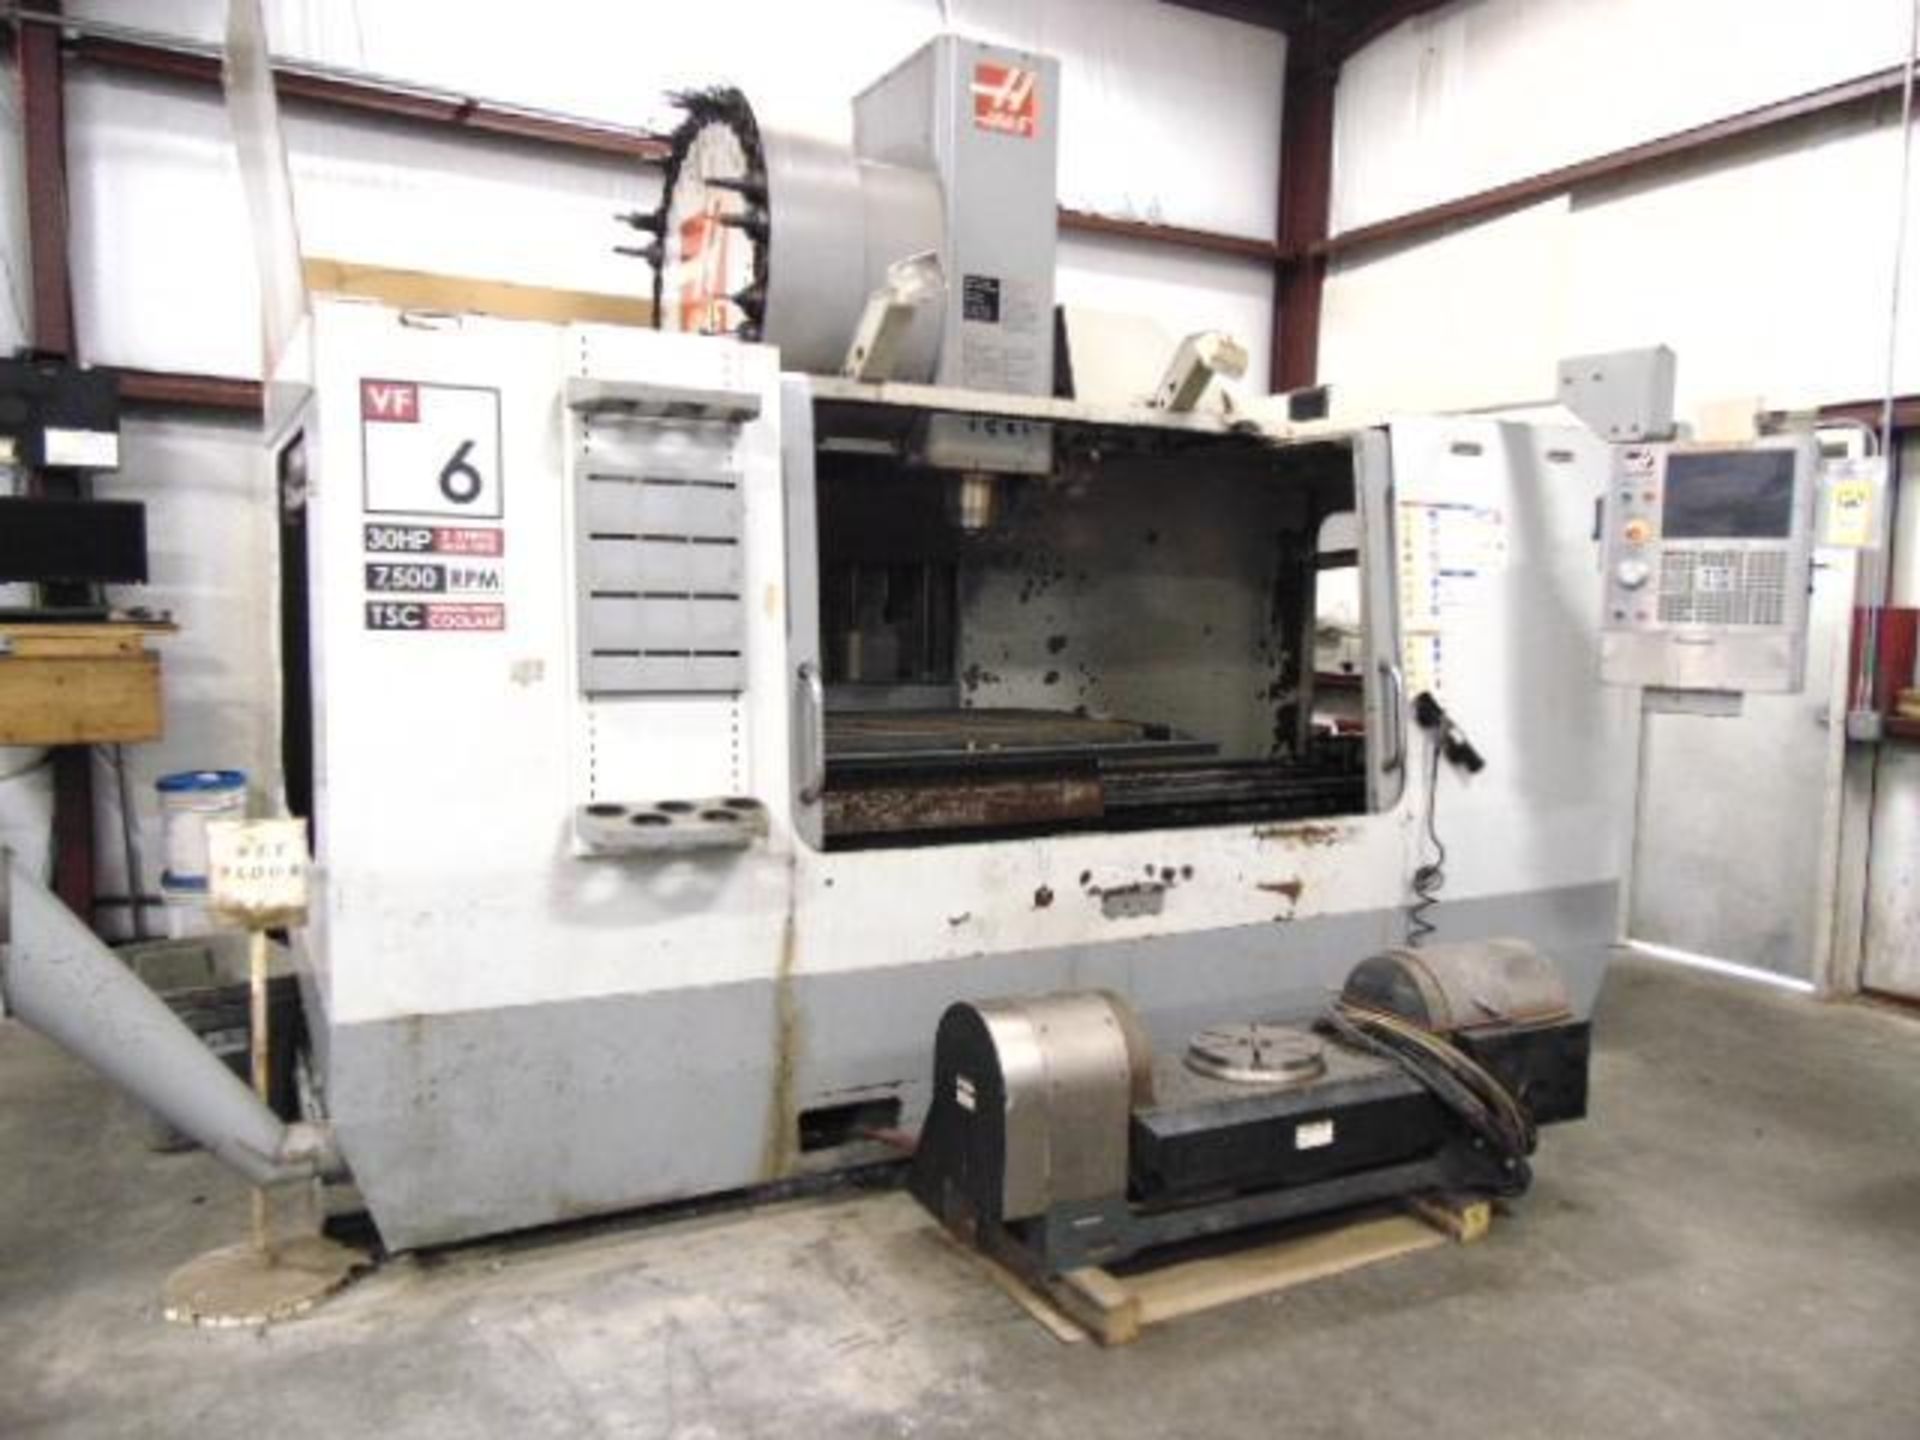 5-AXIS VERTICAL MACHINING CENTER, HAAS MDL. VF6/50, new 2007, 64" x 28" tbl size, 64" X, 32" Y, 30"